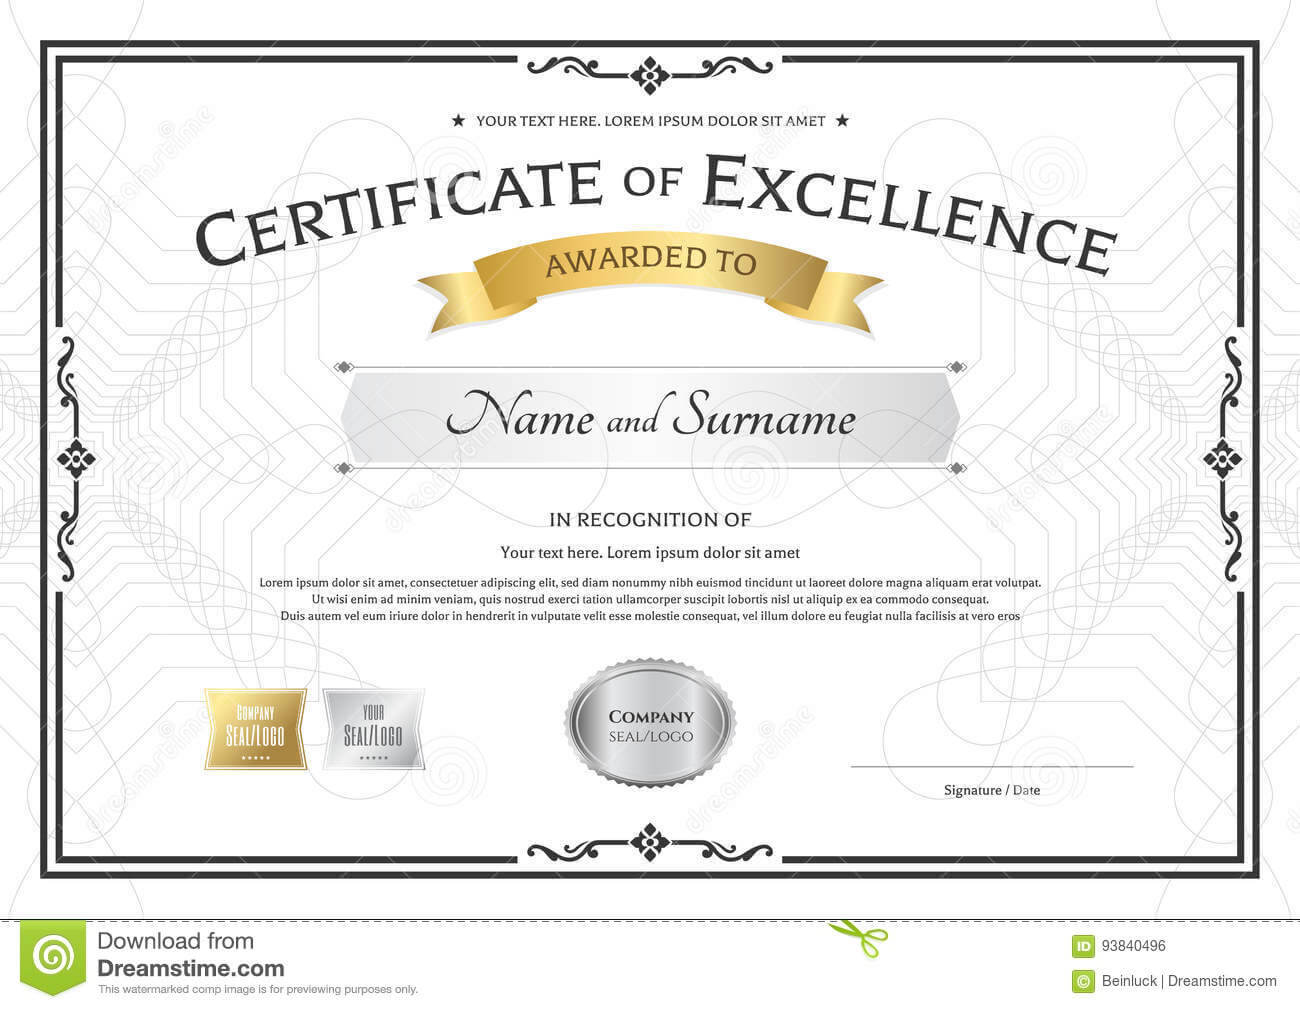 Certificate Of Excellence Template With Gold Award Ribbon On Pertaining To Award Of Excellence Certificate Template